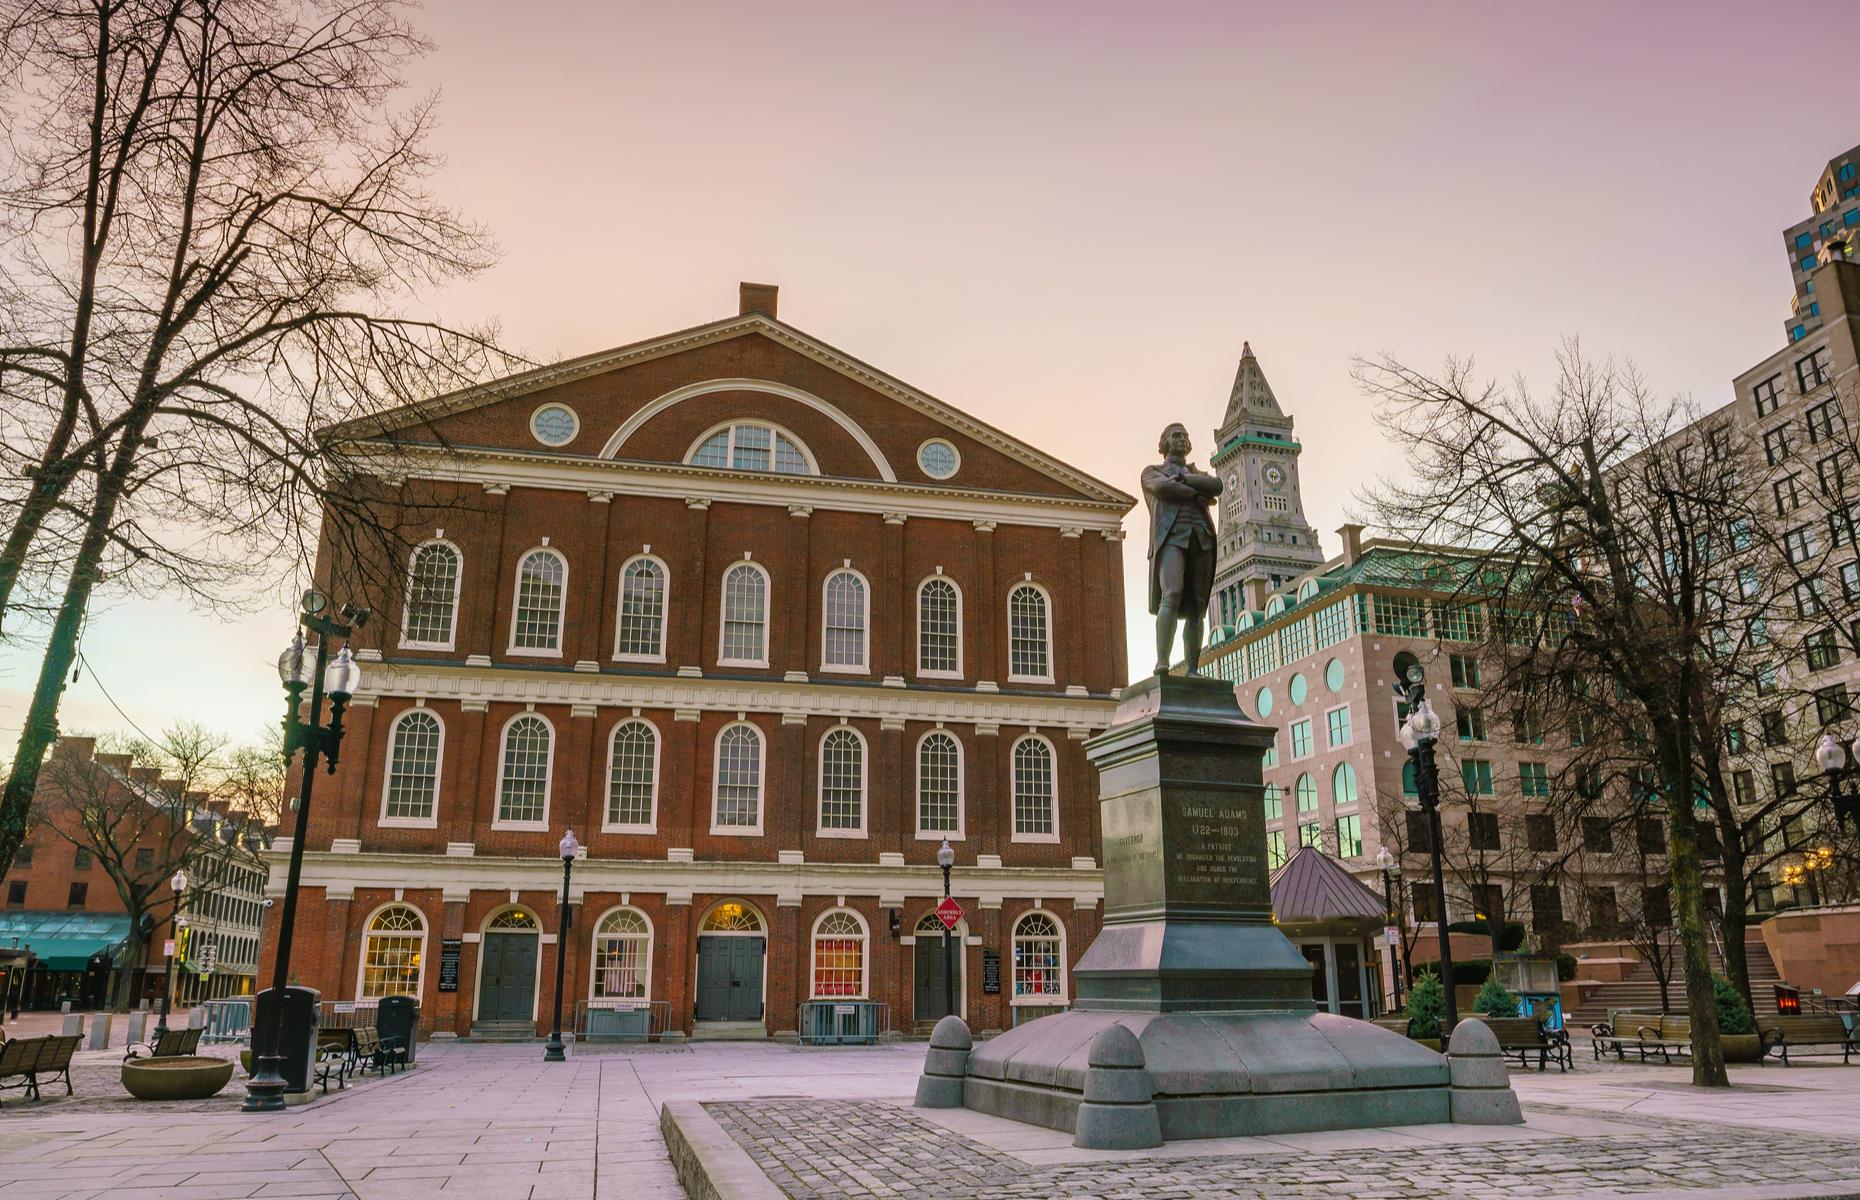 Faneuil Hall has been a meeting hall and marketplace since 1742 and has served as a platform for some of America’s most important historical figures. Founding father Samuel Adams gave a particularly famous and stirring speech about independence here – a statue of him still stands before the building. The hall is a key site along the Freedom Trail, a route connecting some of the city’s most important historical sites, including Boston Common, the oldest public park in the USA.